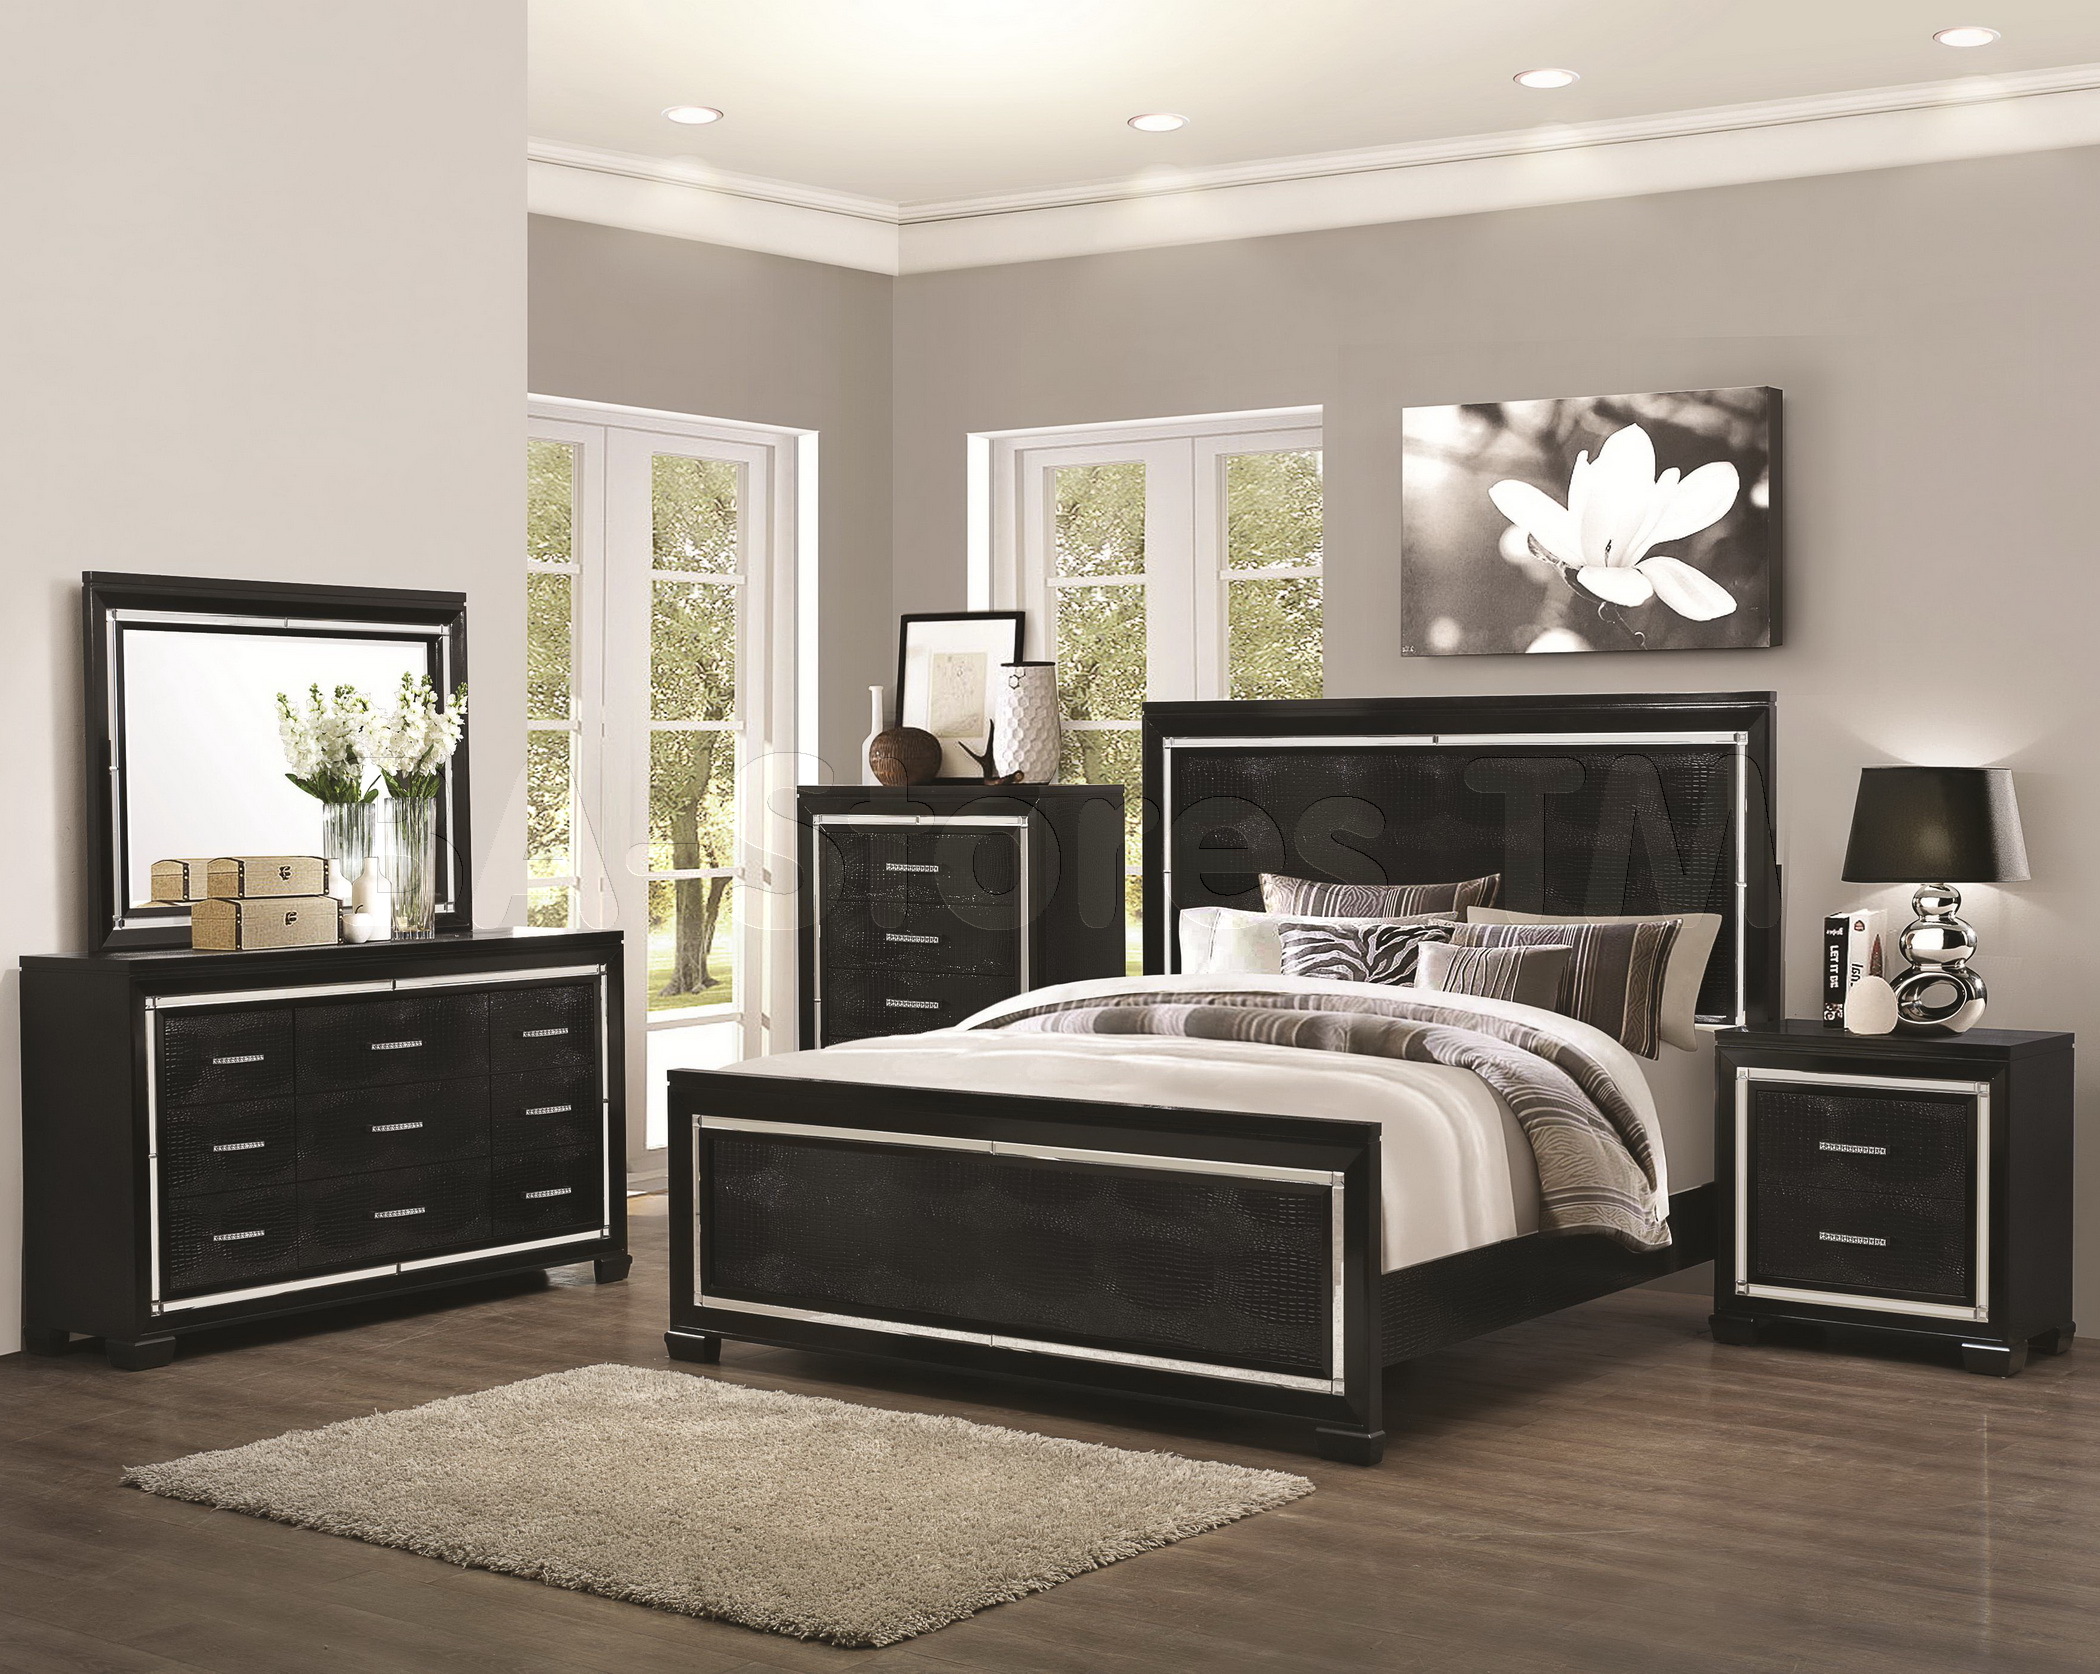 black and mirrored bedroom furniture photo - 4